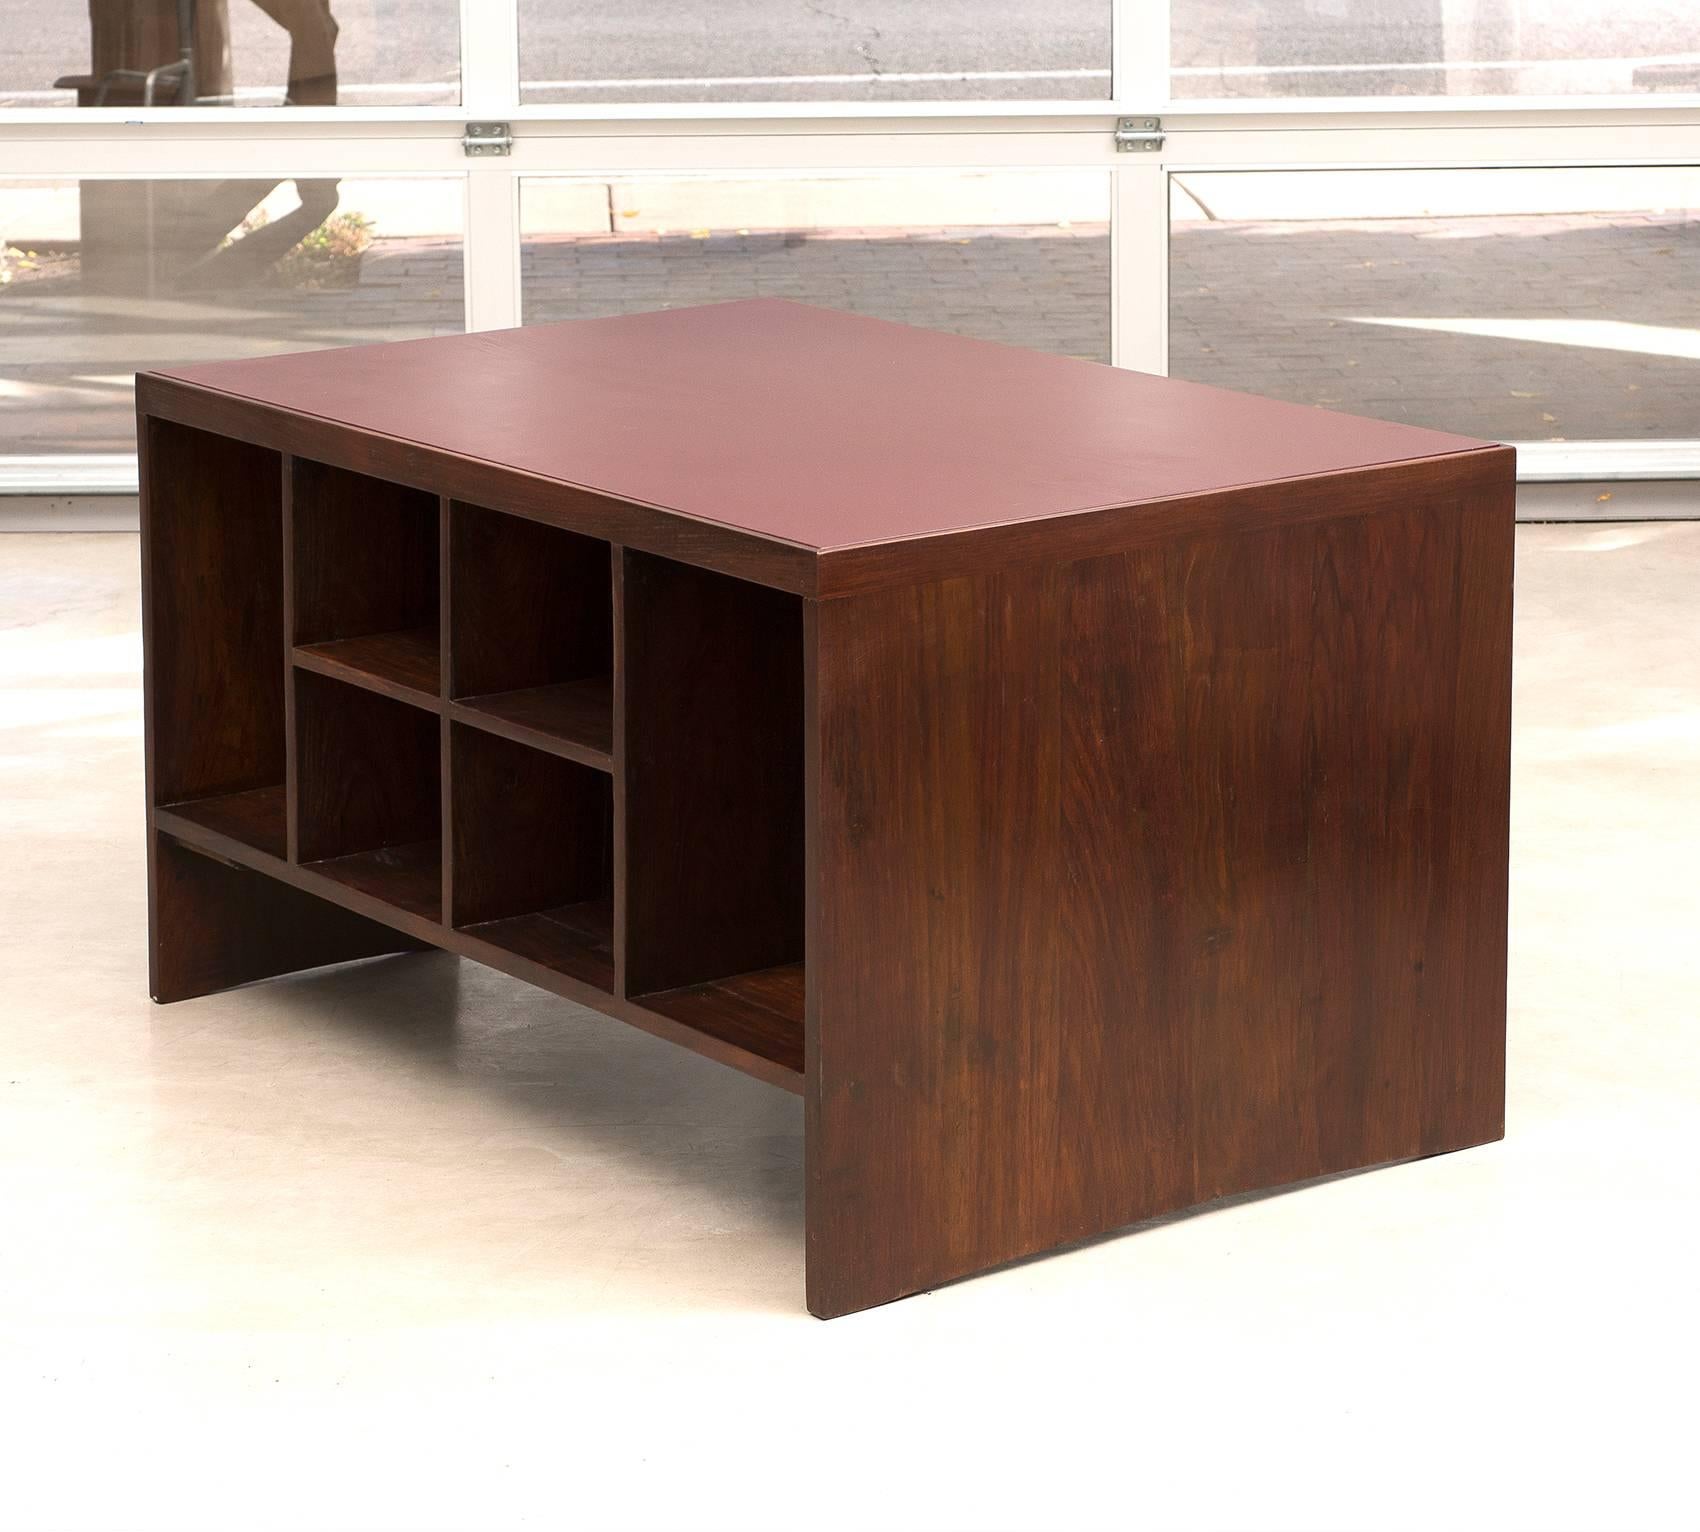 Mid-20th Century Pierre Jeanneret Chandigarh Desk in Indian Rosewood, 1950s